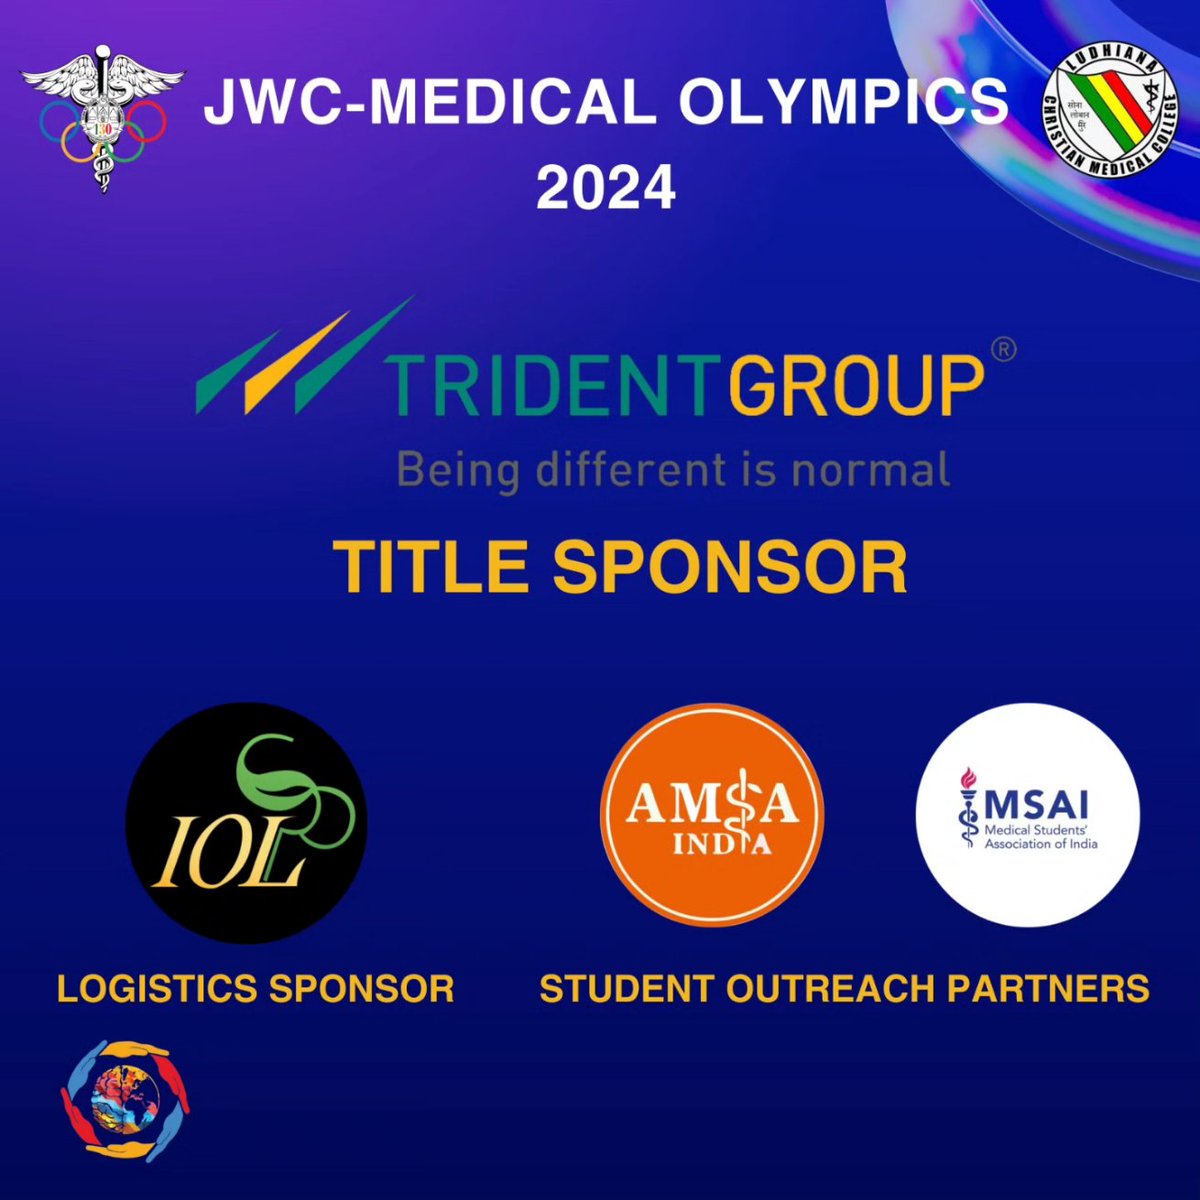 A 3 day journey of sophistication & camaraderie in our institution,under guidance of Dr Jeyaraj D Pandian-Principal, President-elect World Stroke Organisation. Join at JWC- Medical Olympics 2024, where memories unfold with every moment. Visit jwcmedicalolympics.com #JWC-MO_2024